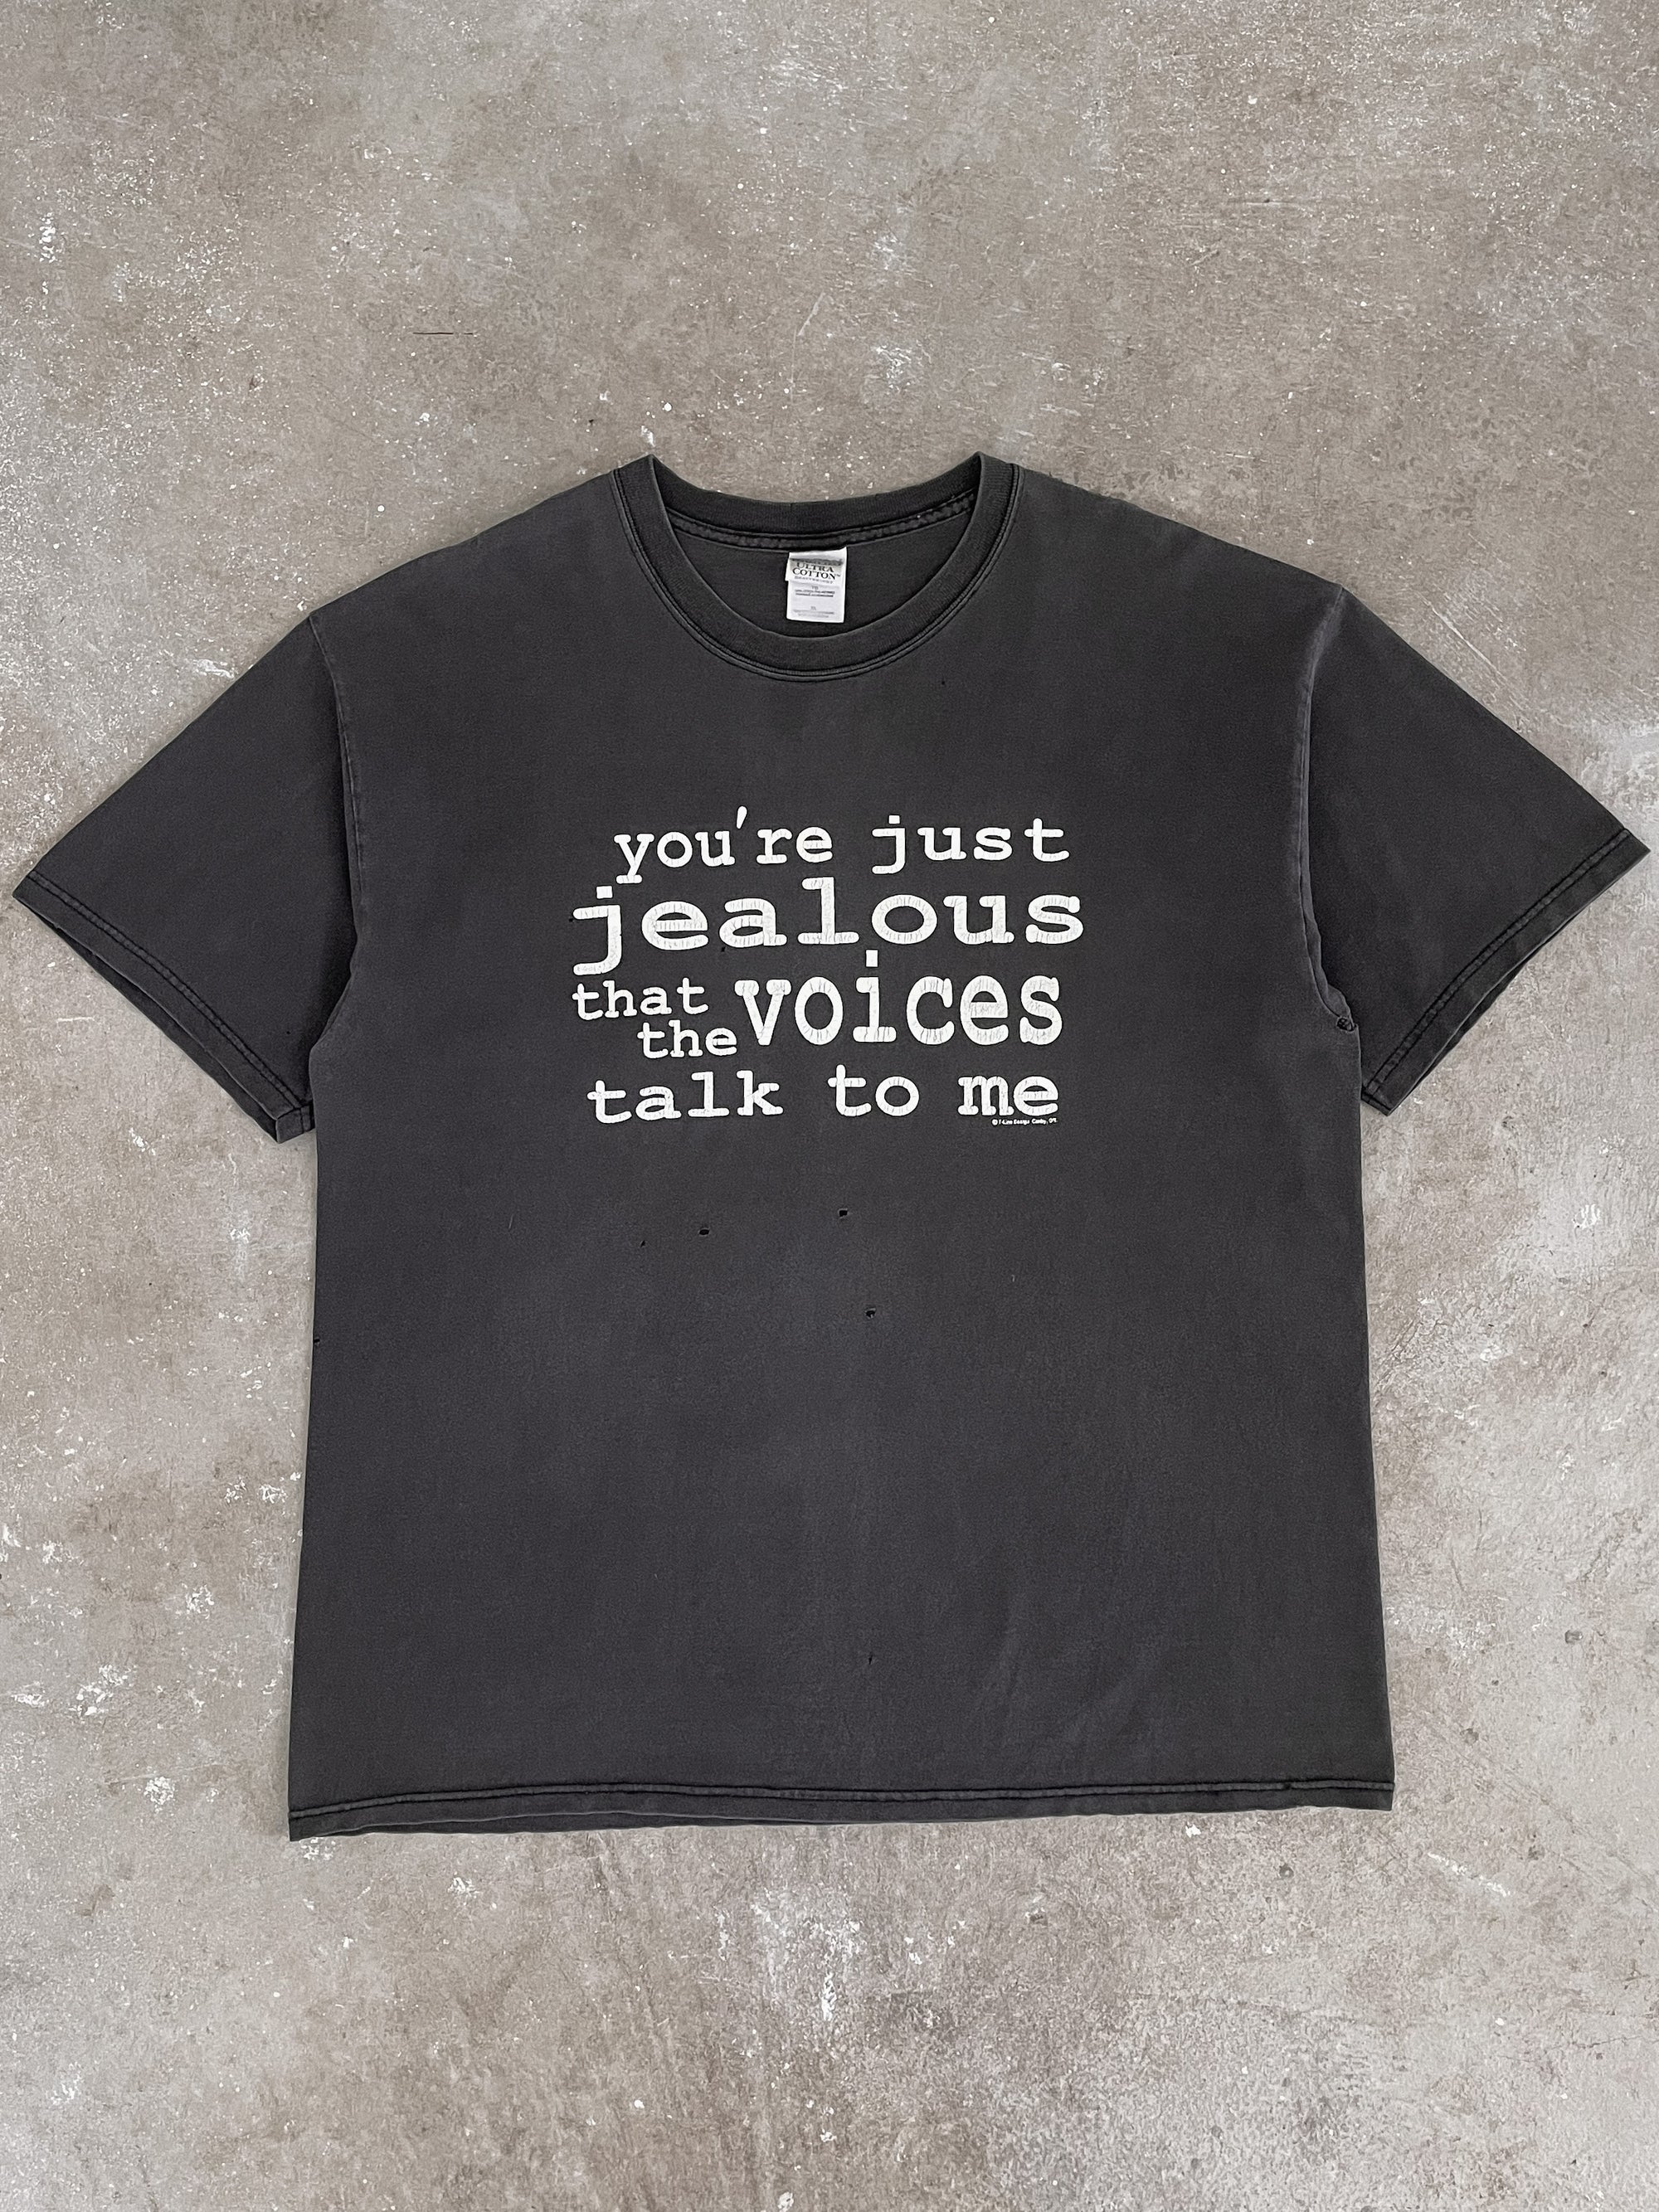 1990s/00s “The Voices Talk To Me” Faded Tee (XL)